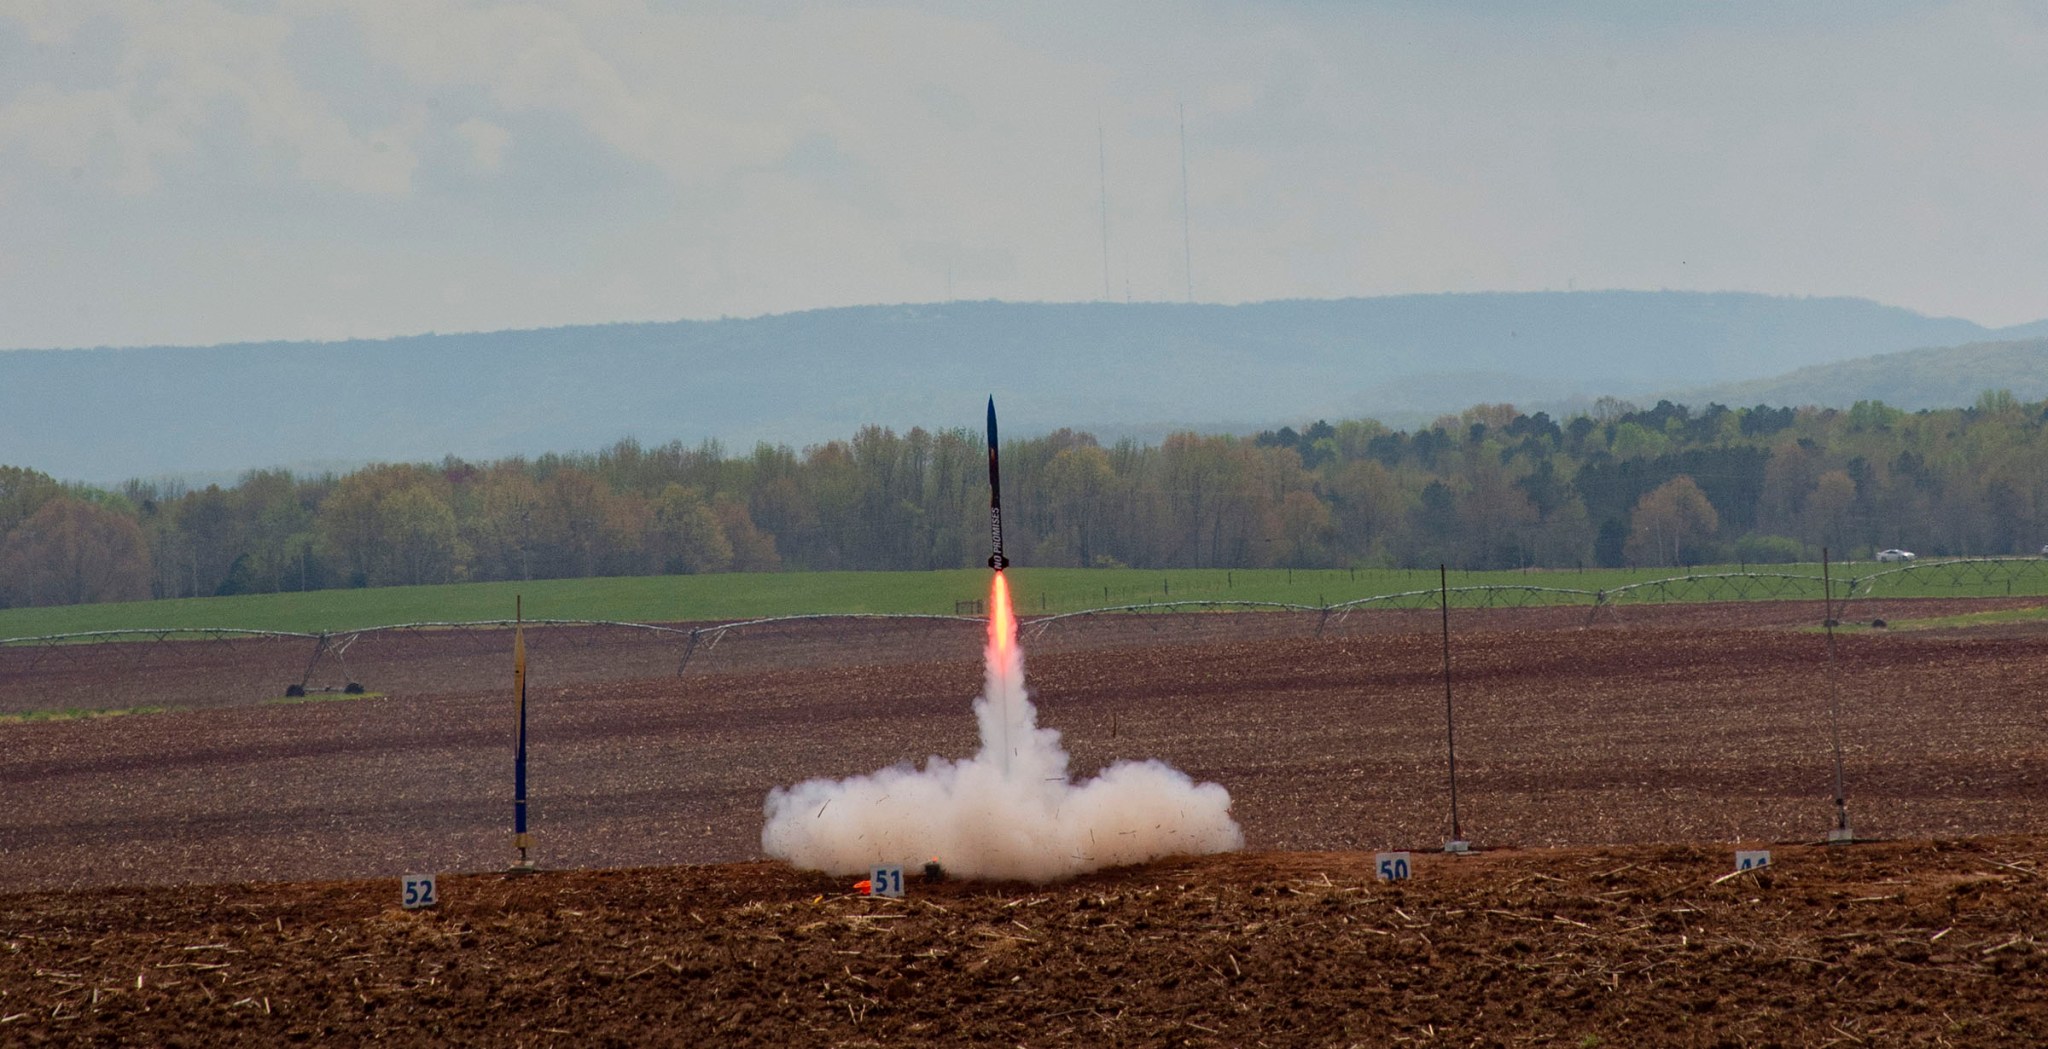 The rocket named “No Promises,” from the North Carolina State University rocket team in Raleigh, North Carolina.